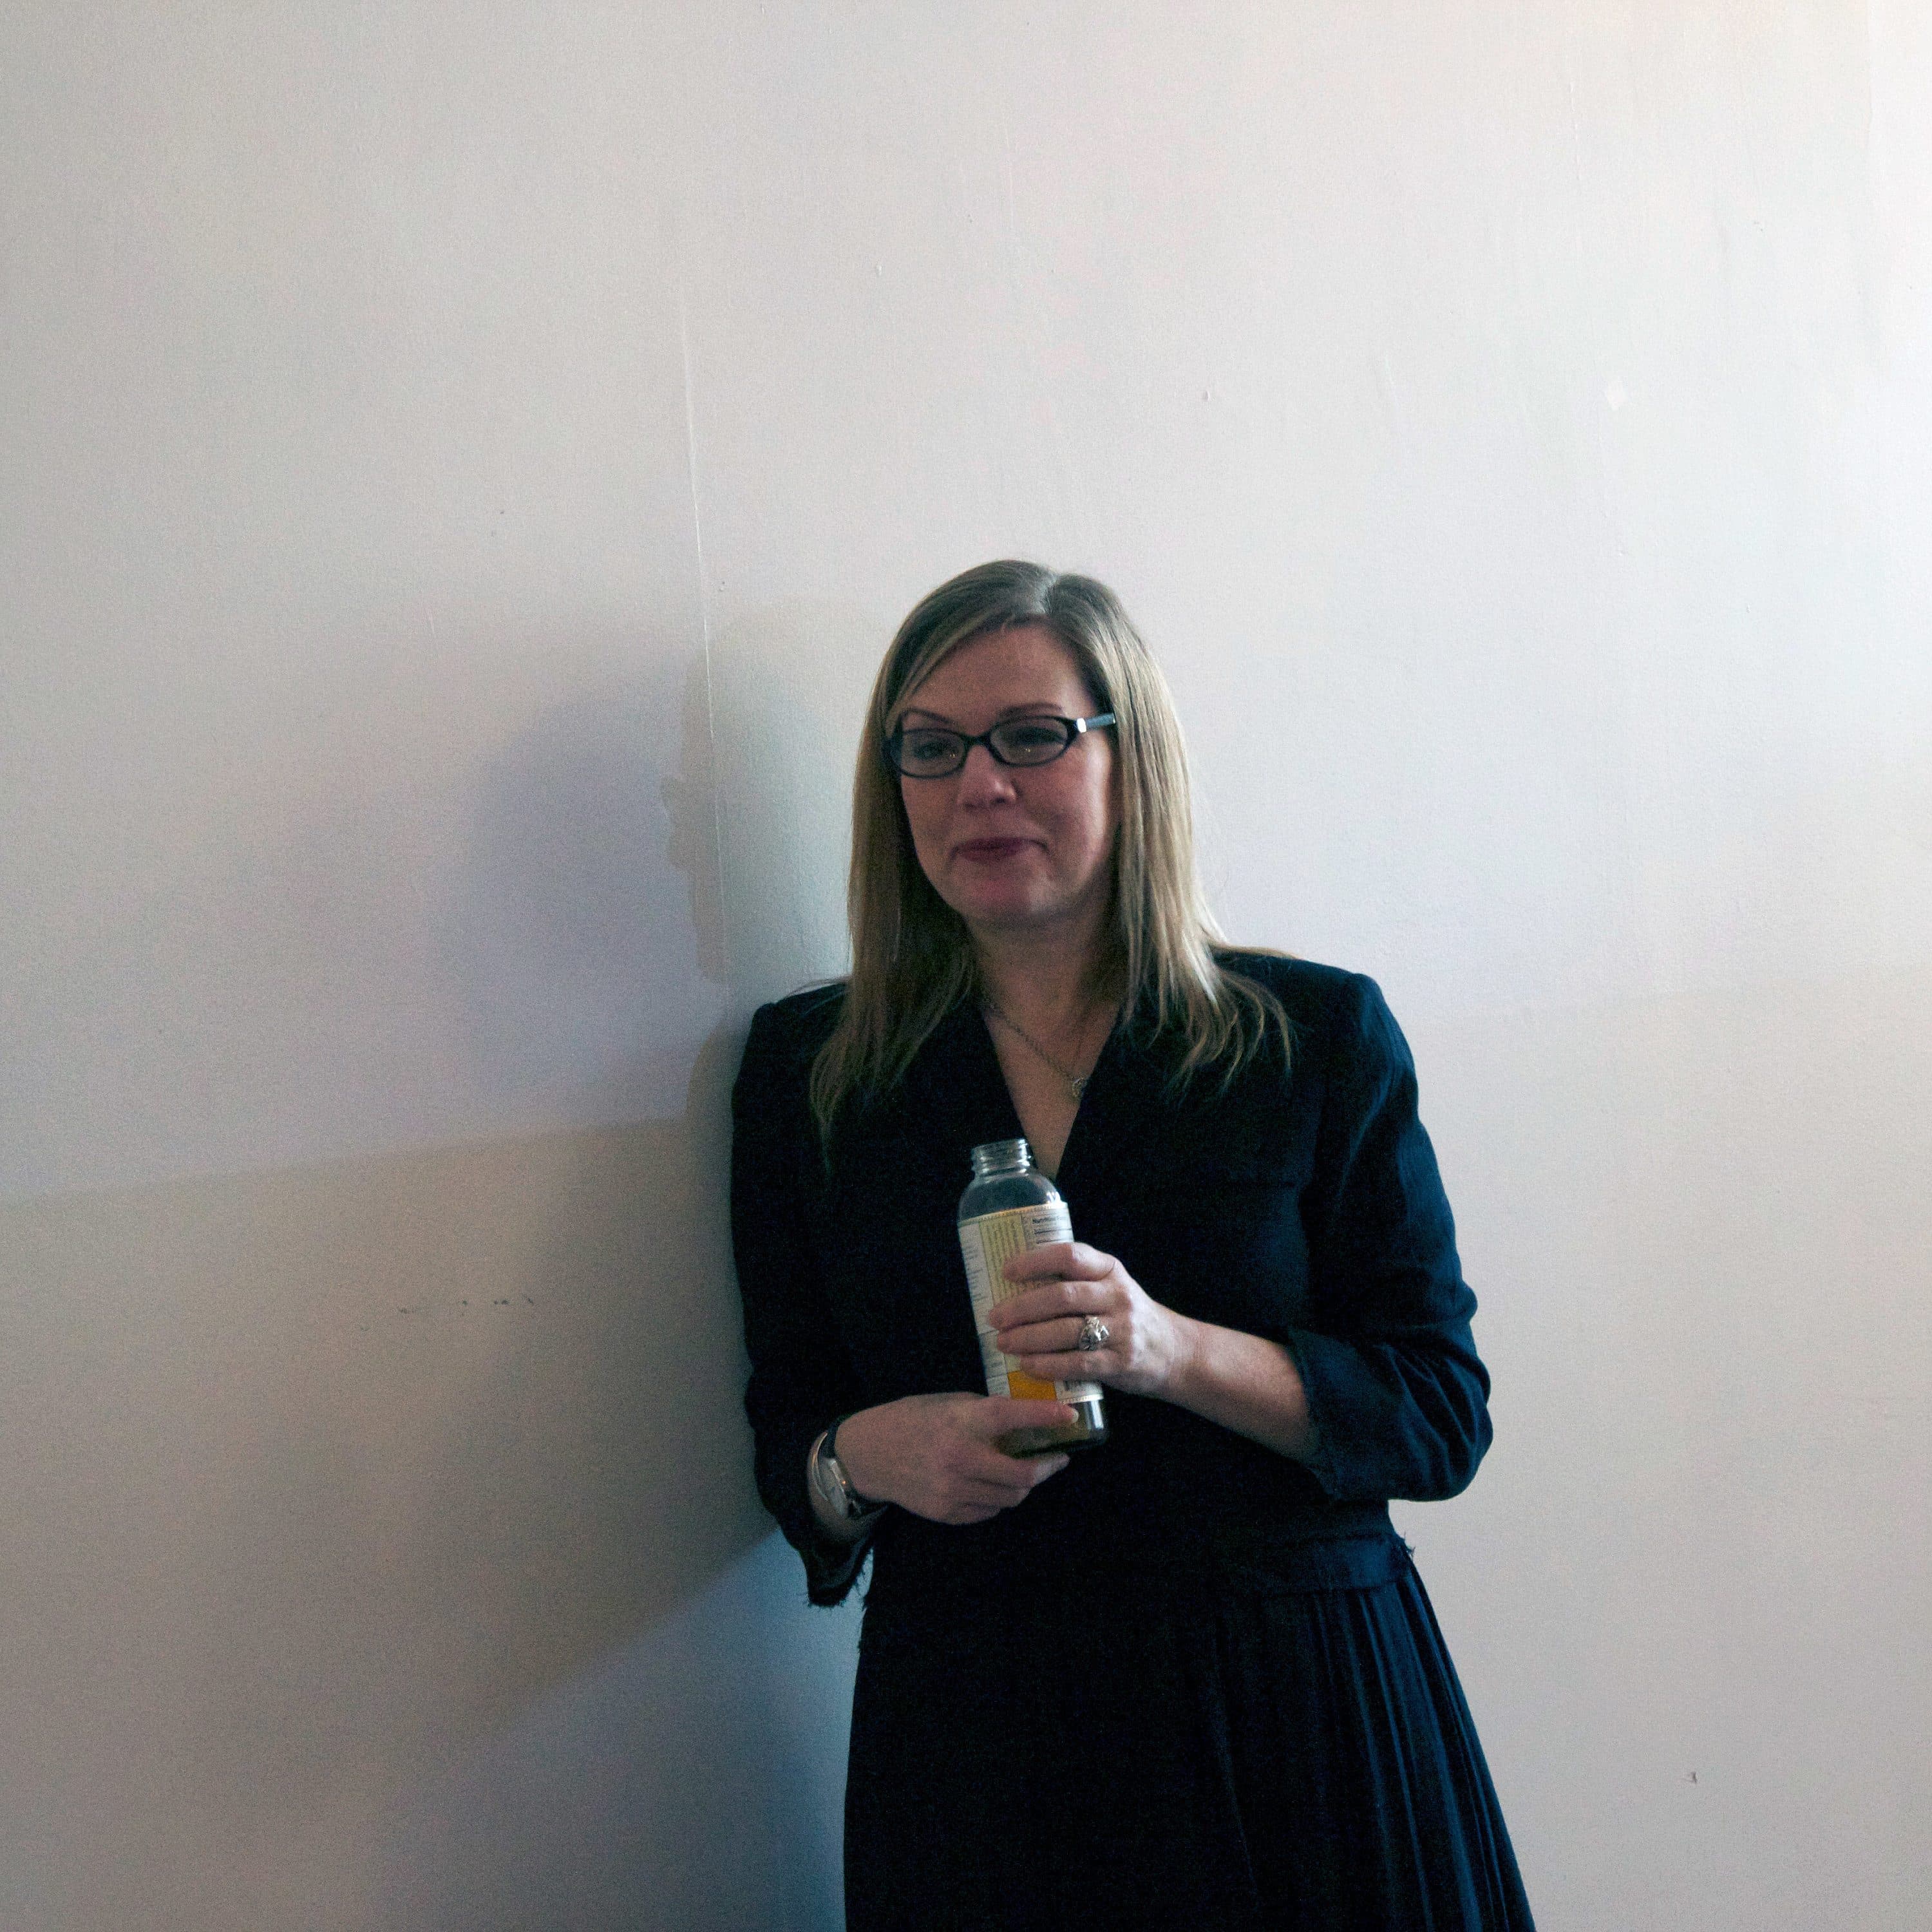 A woman with long blonde hair, glasses, and a black dress stands against a light-colored wall holding a bottled drink. The image is minimally decorated, with some yellow flowers visible in the lower left corner.